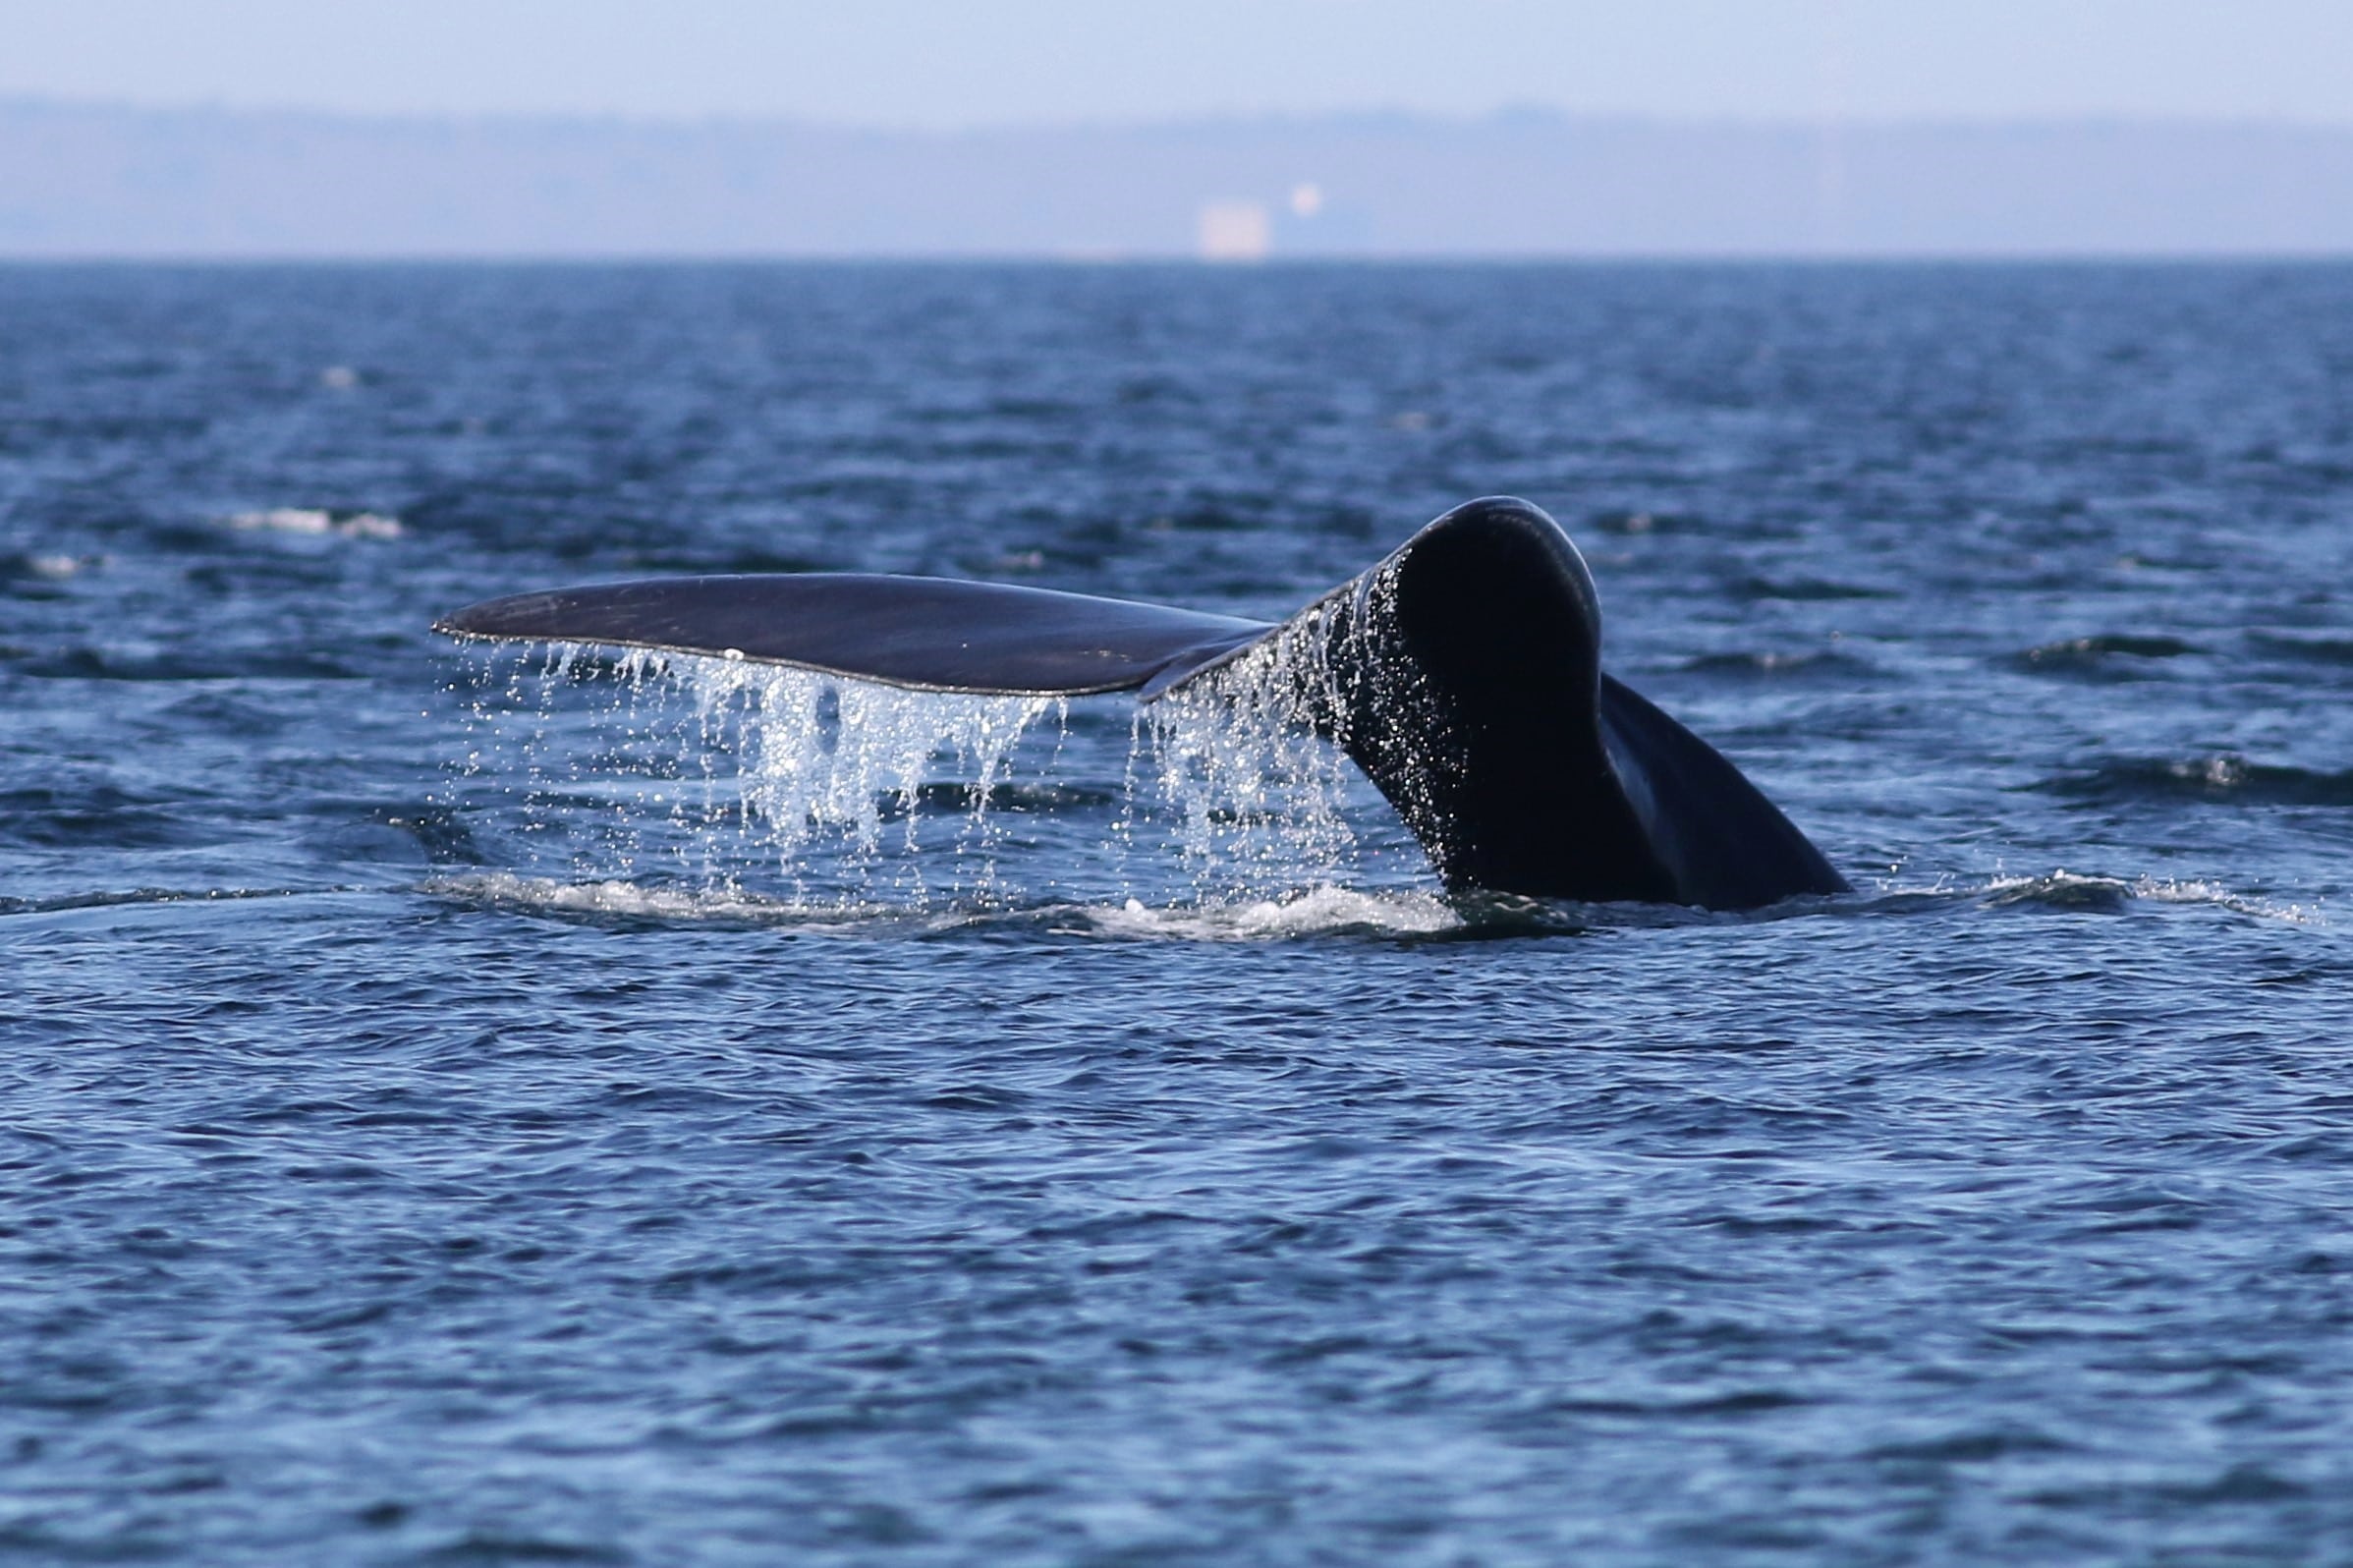 North Atlantic right whale lifts its fluke out of the water.